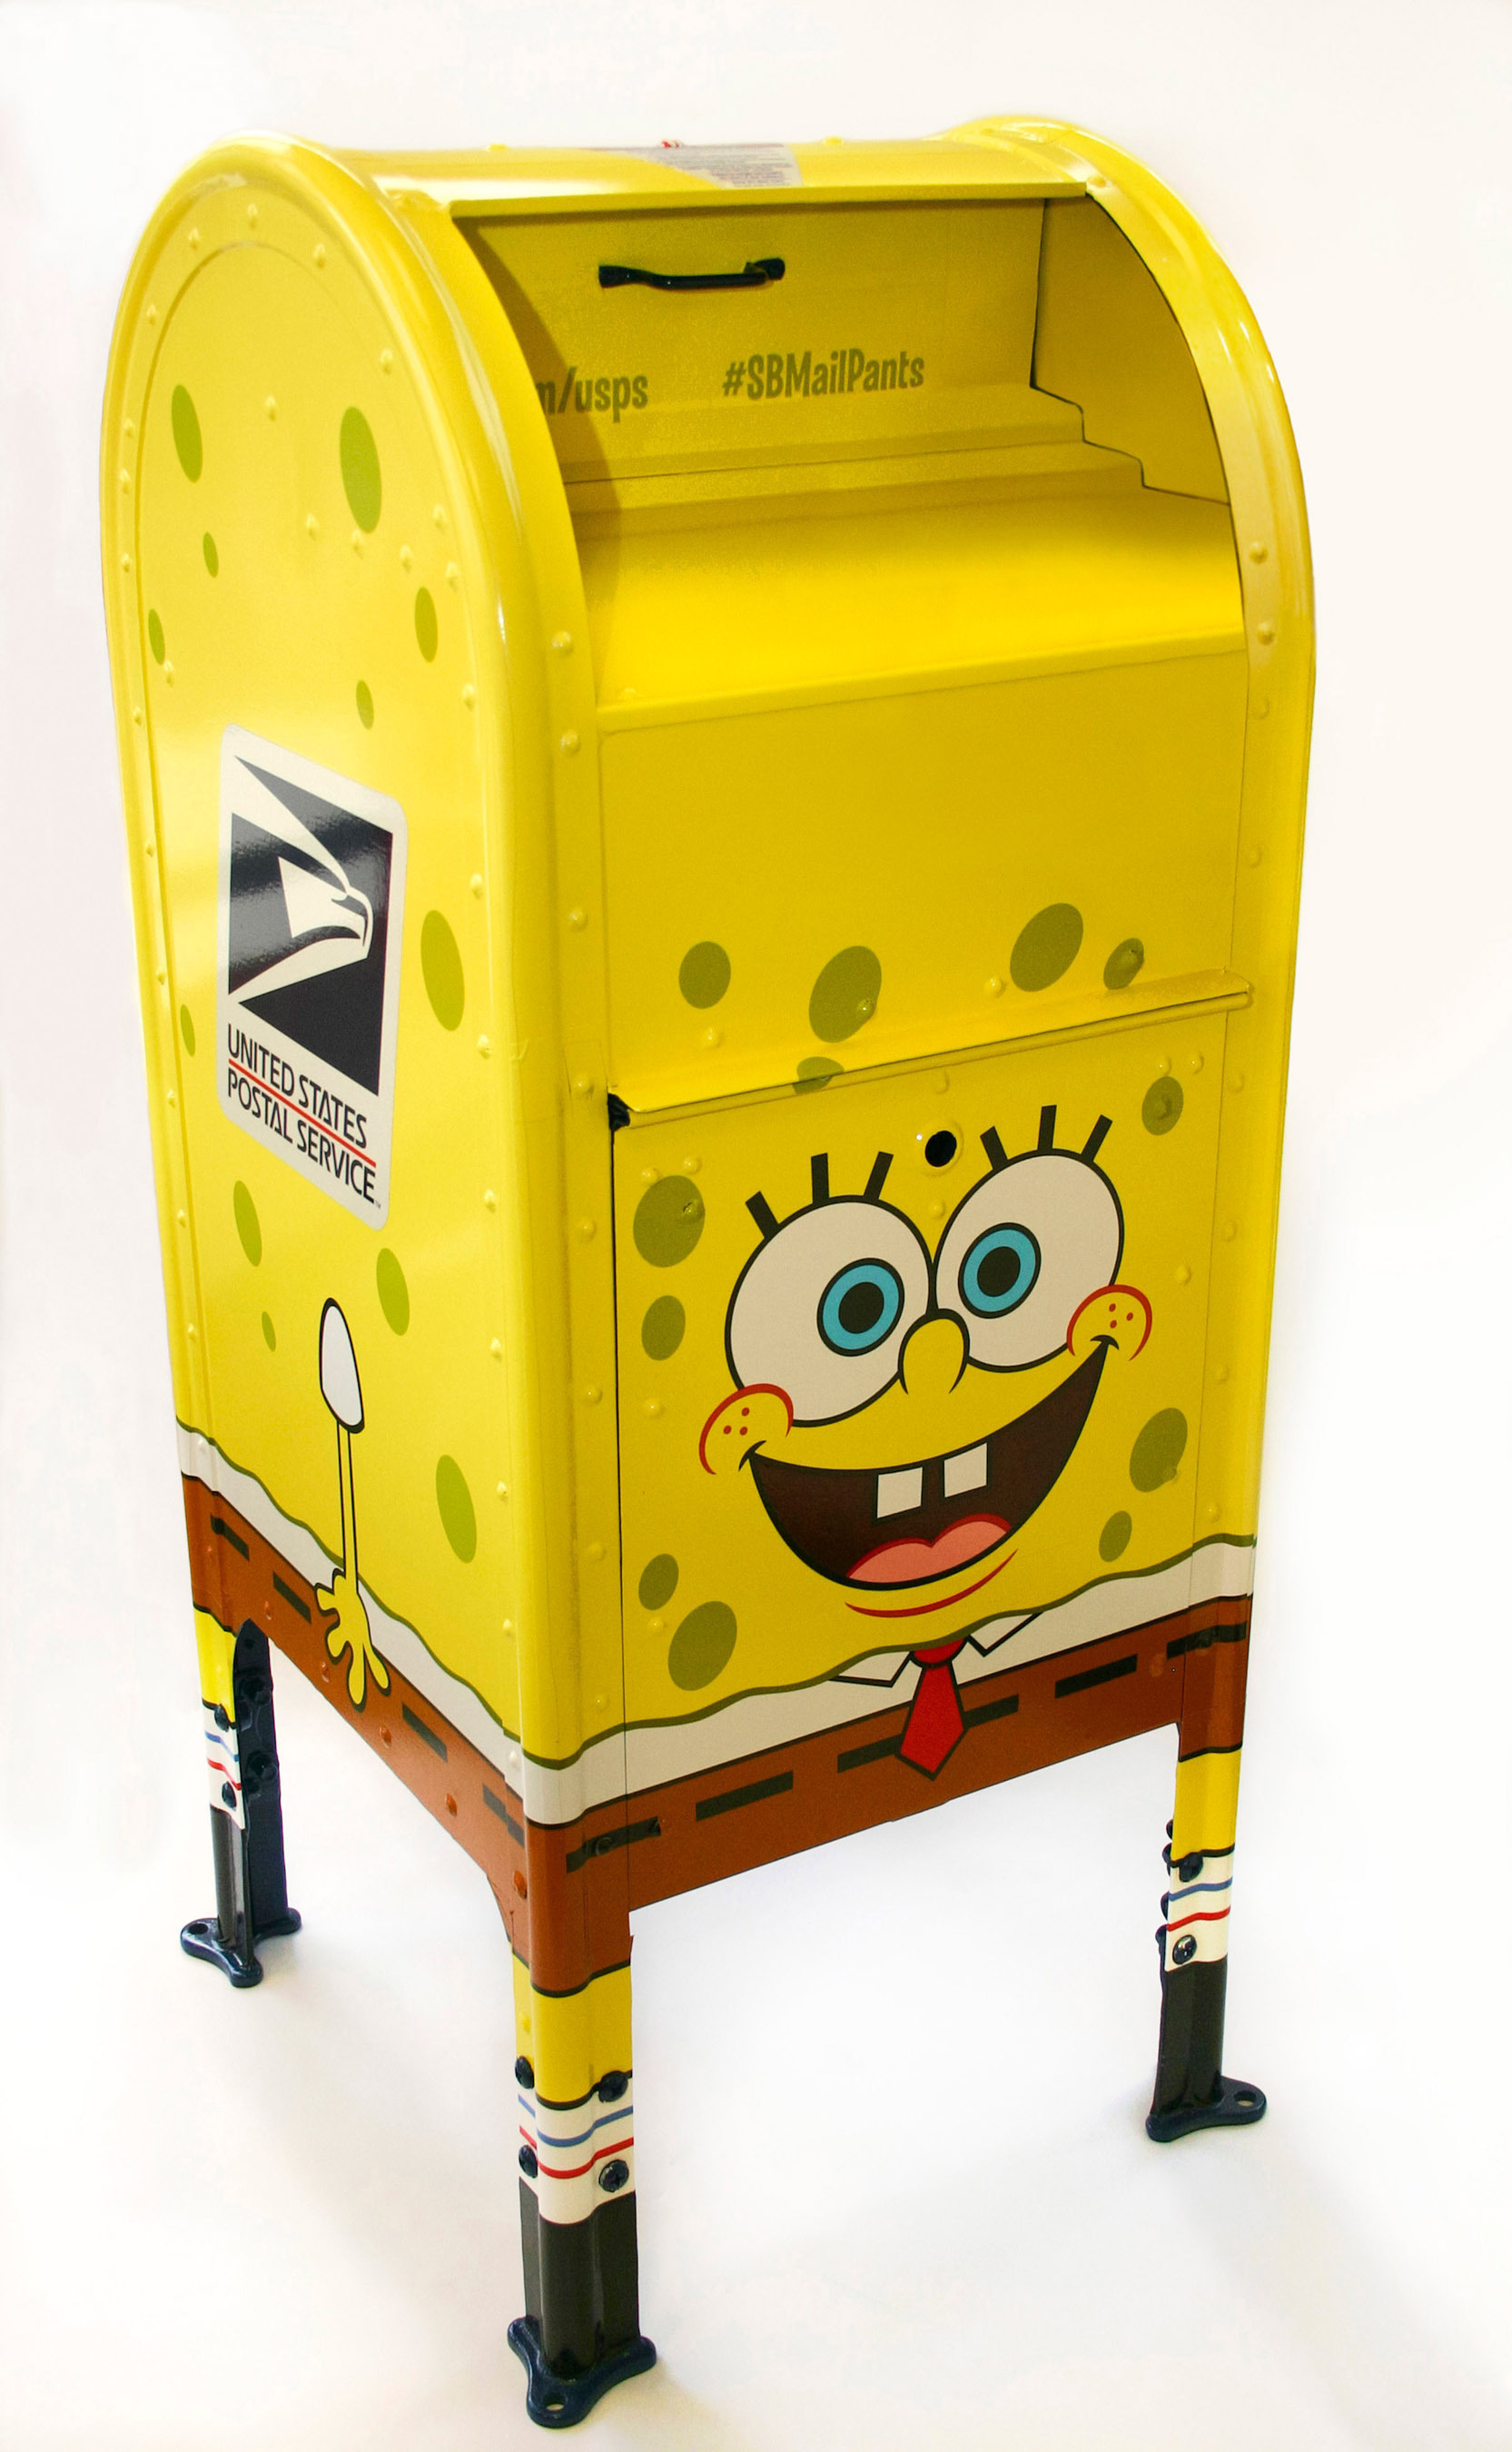 Thirty SpongeBob SquarePants-themed mailboxes to be featured in 13 cities nationwide in honor of Nickelodeon and U.S. Postal Service "SpongeBob MailPants" letter writing program. Photo: Susanna Martin/Nickelodeon. (C)2013 Viacom, International, Inc. All Rights Reserved. (PRNewsFoto/Nickelodeon) (PRNewsFoto/NICKELODEON)